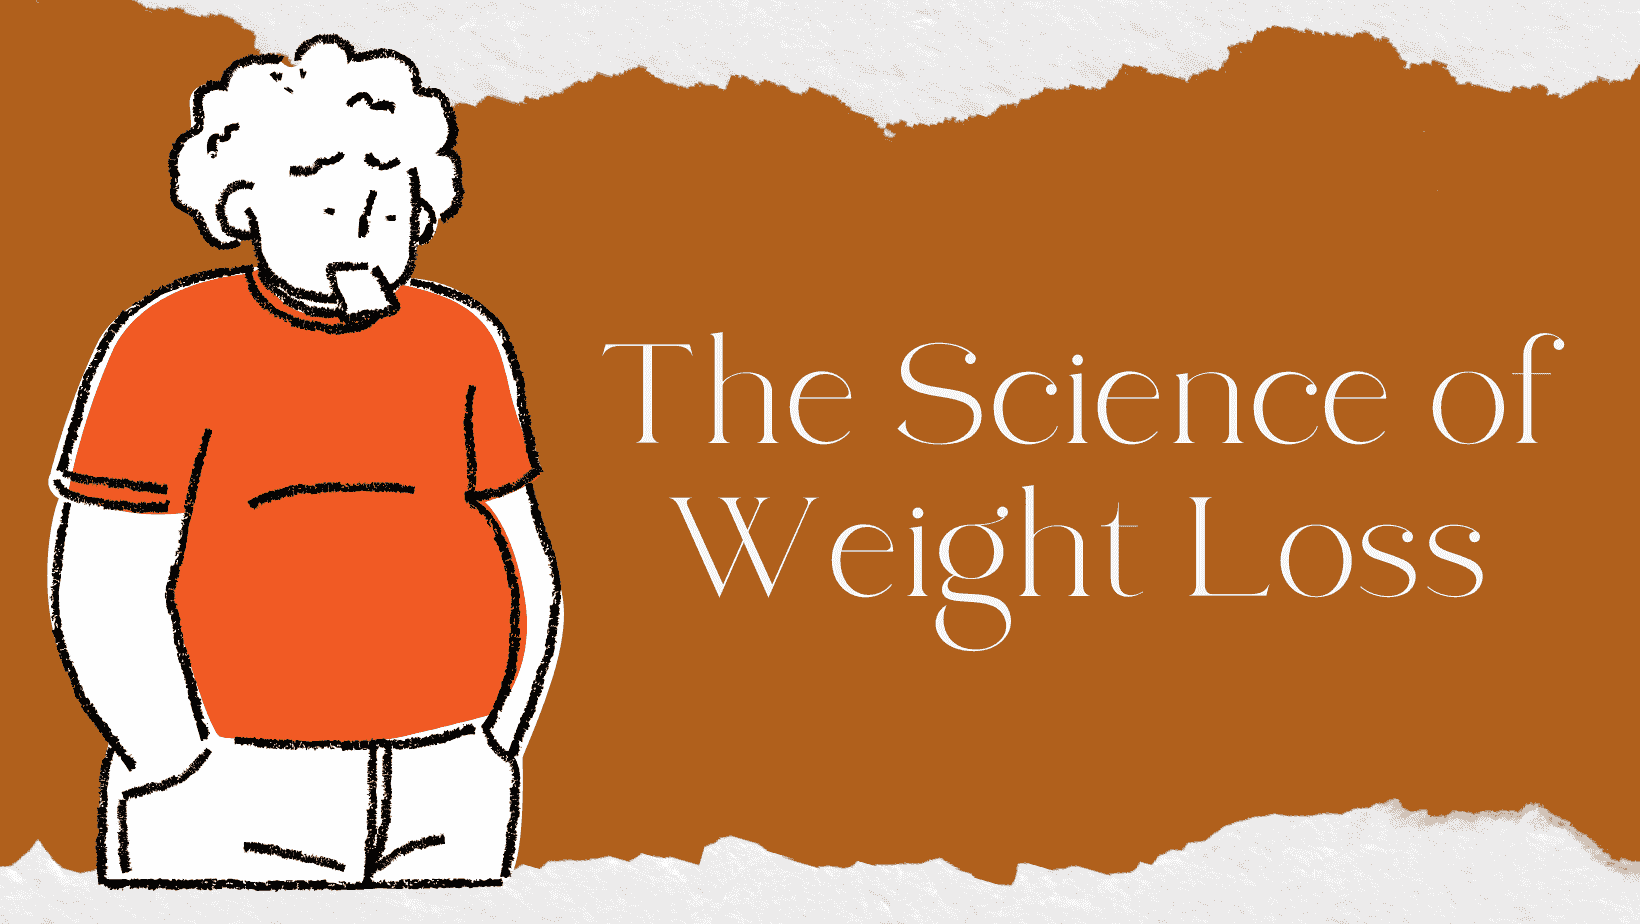 Weight Loss: A Scientific Approach